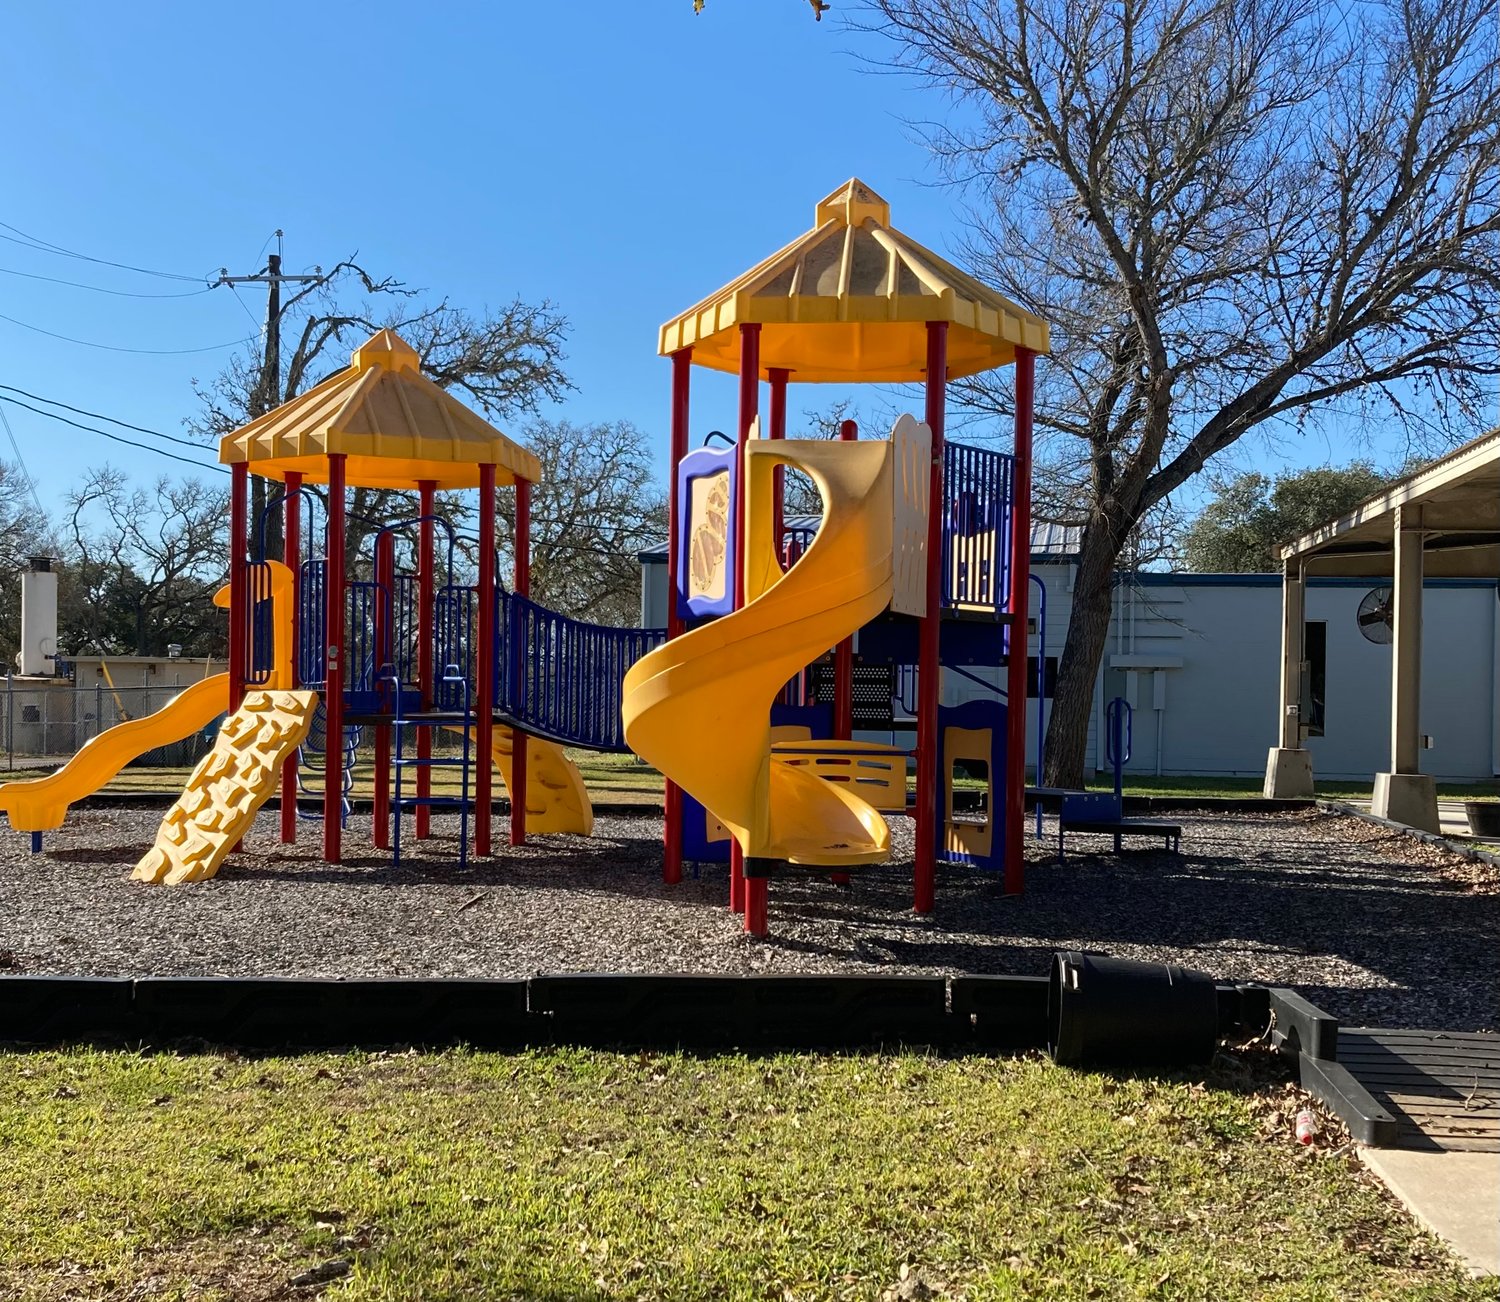 The playground is one of the many amenities for special needs children at the Elks Camp facility.